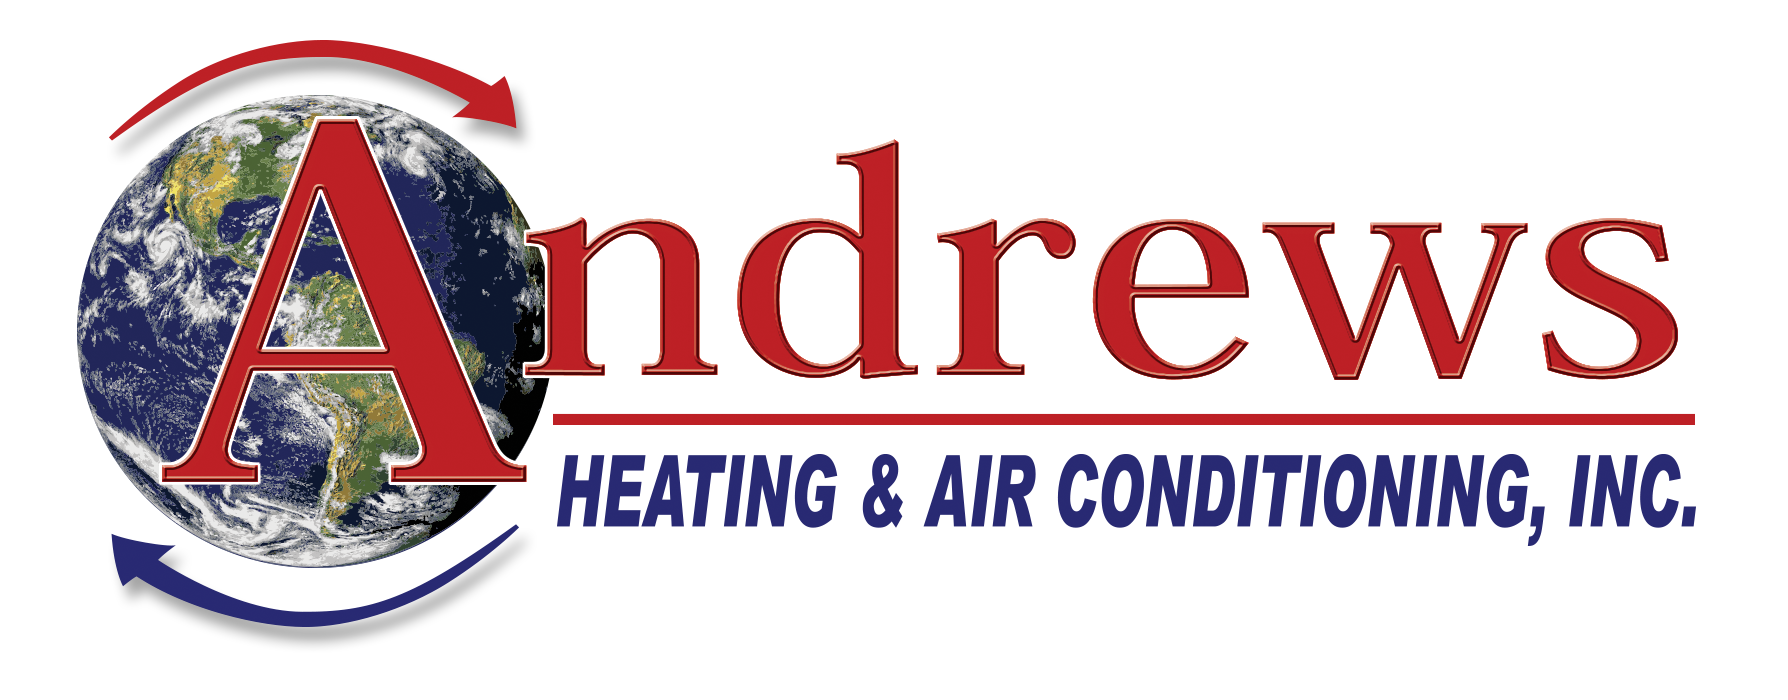 Andrews Heating and Cooling